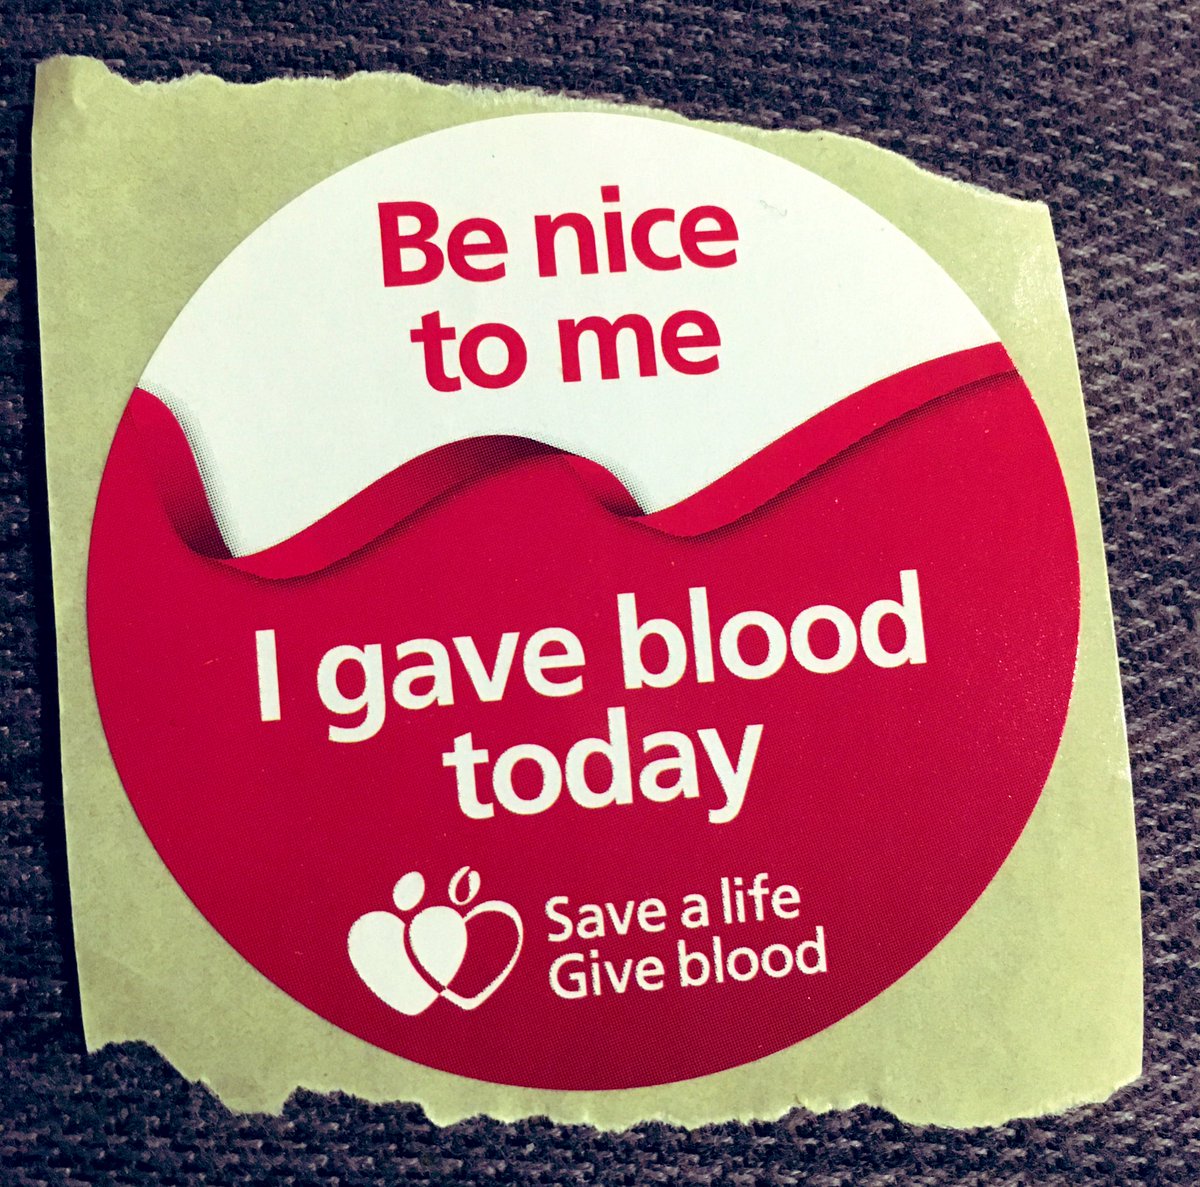 First blood donation done today 🙂@GiveBloodNHS #KeepDonating